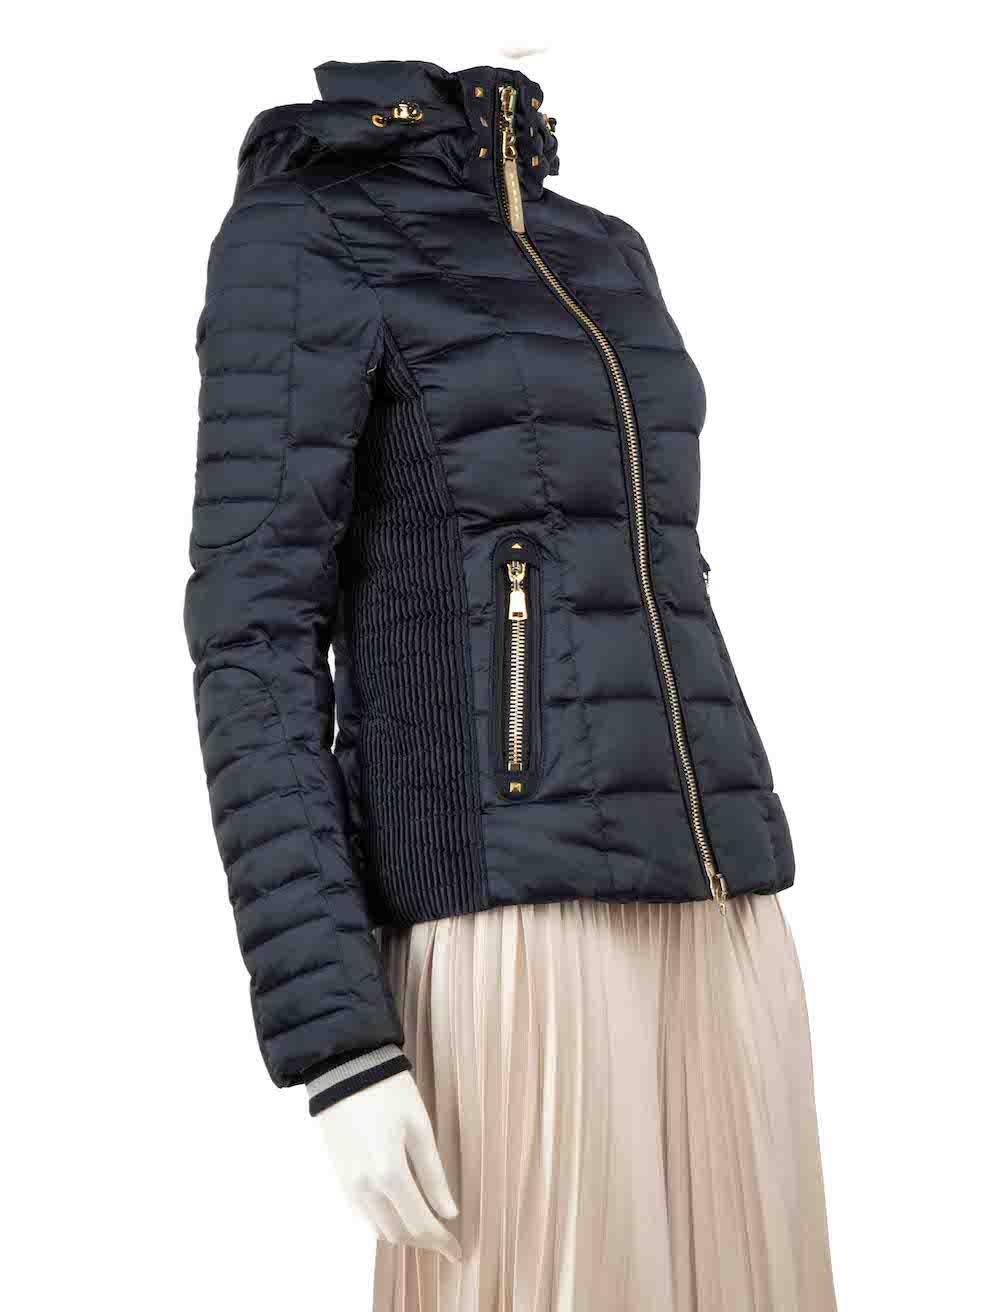 CONDITION is Very good. Minimal wear to jacket is evident. The lower zipper pull is missing on this used Bogner designer resale item.
 
 
 
 Details
 
 
 Navy
 
 Synthetic
 
 Puffer jacket
 
 Goose down
 
 Long sleeves
 
 Zip fastening
 
 Detachable